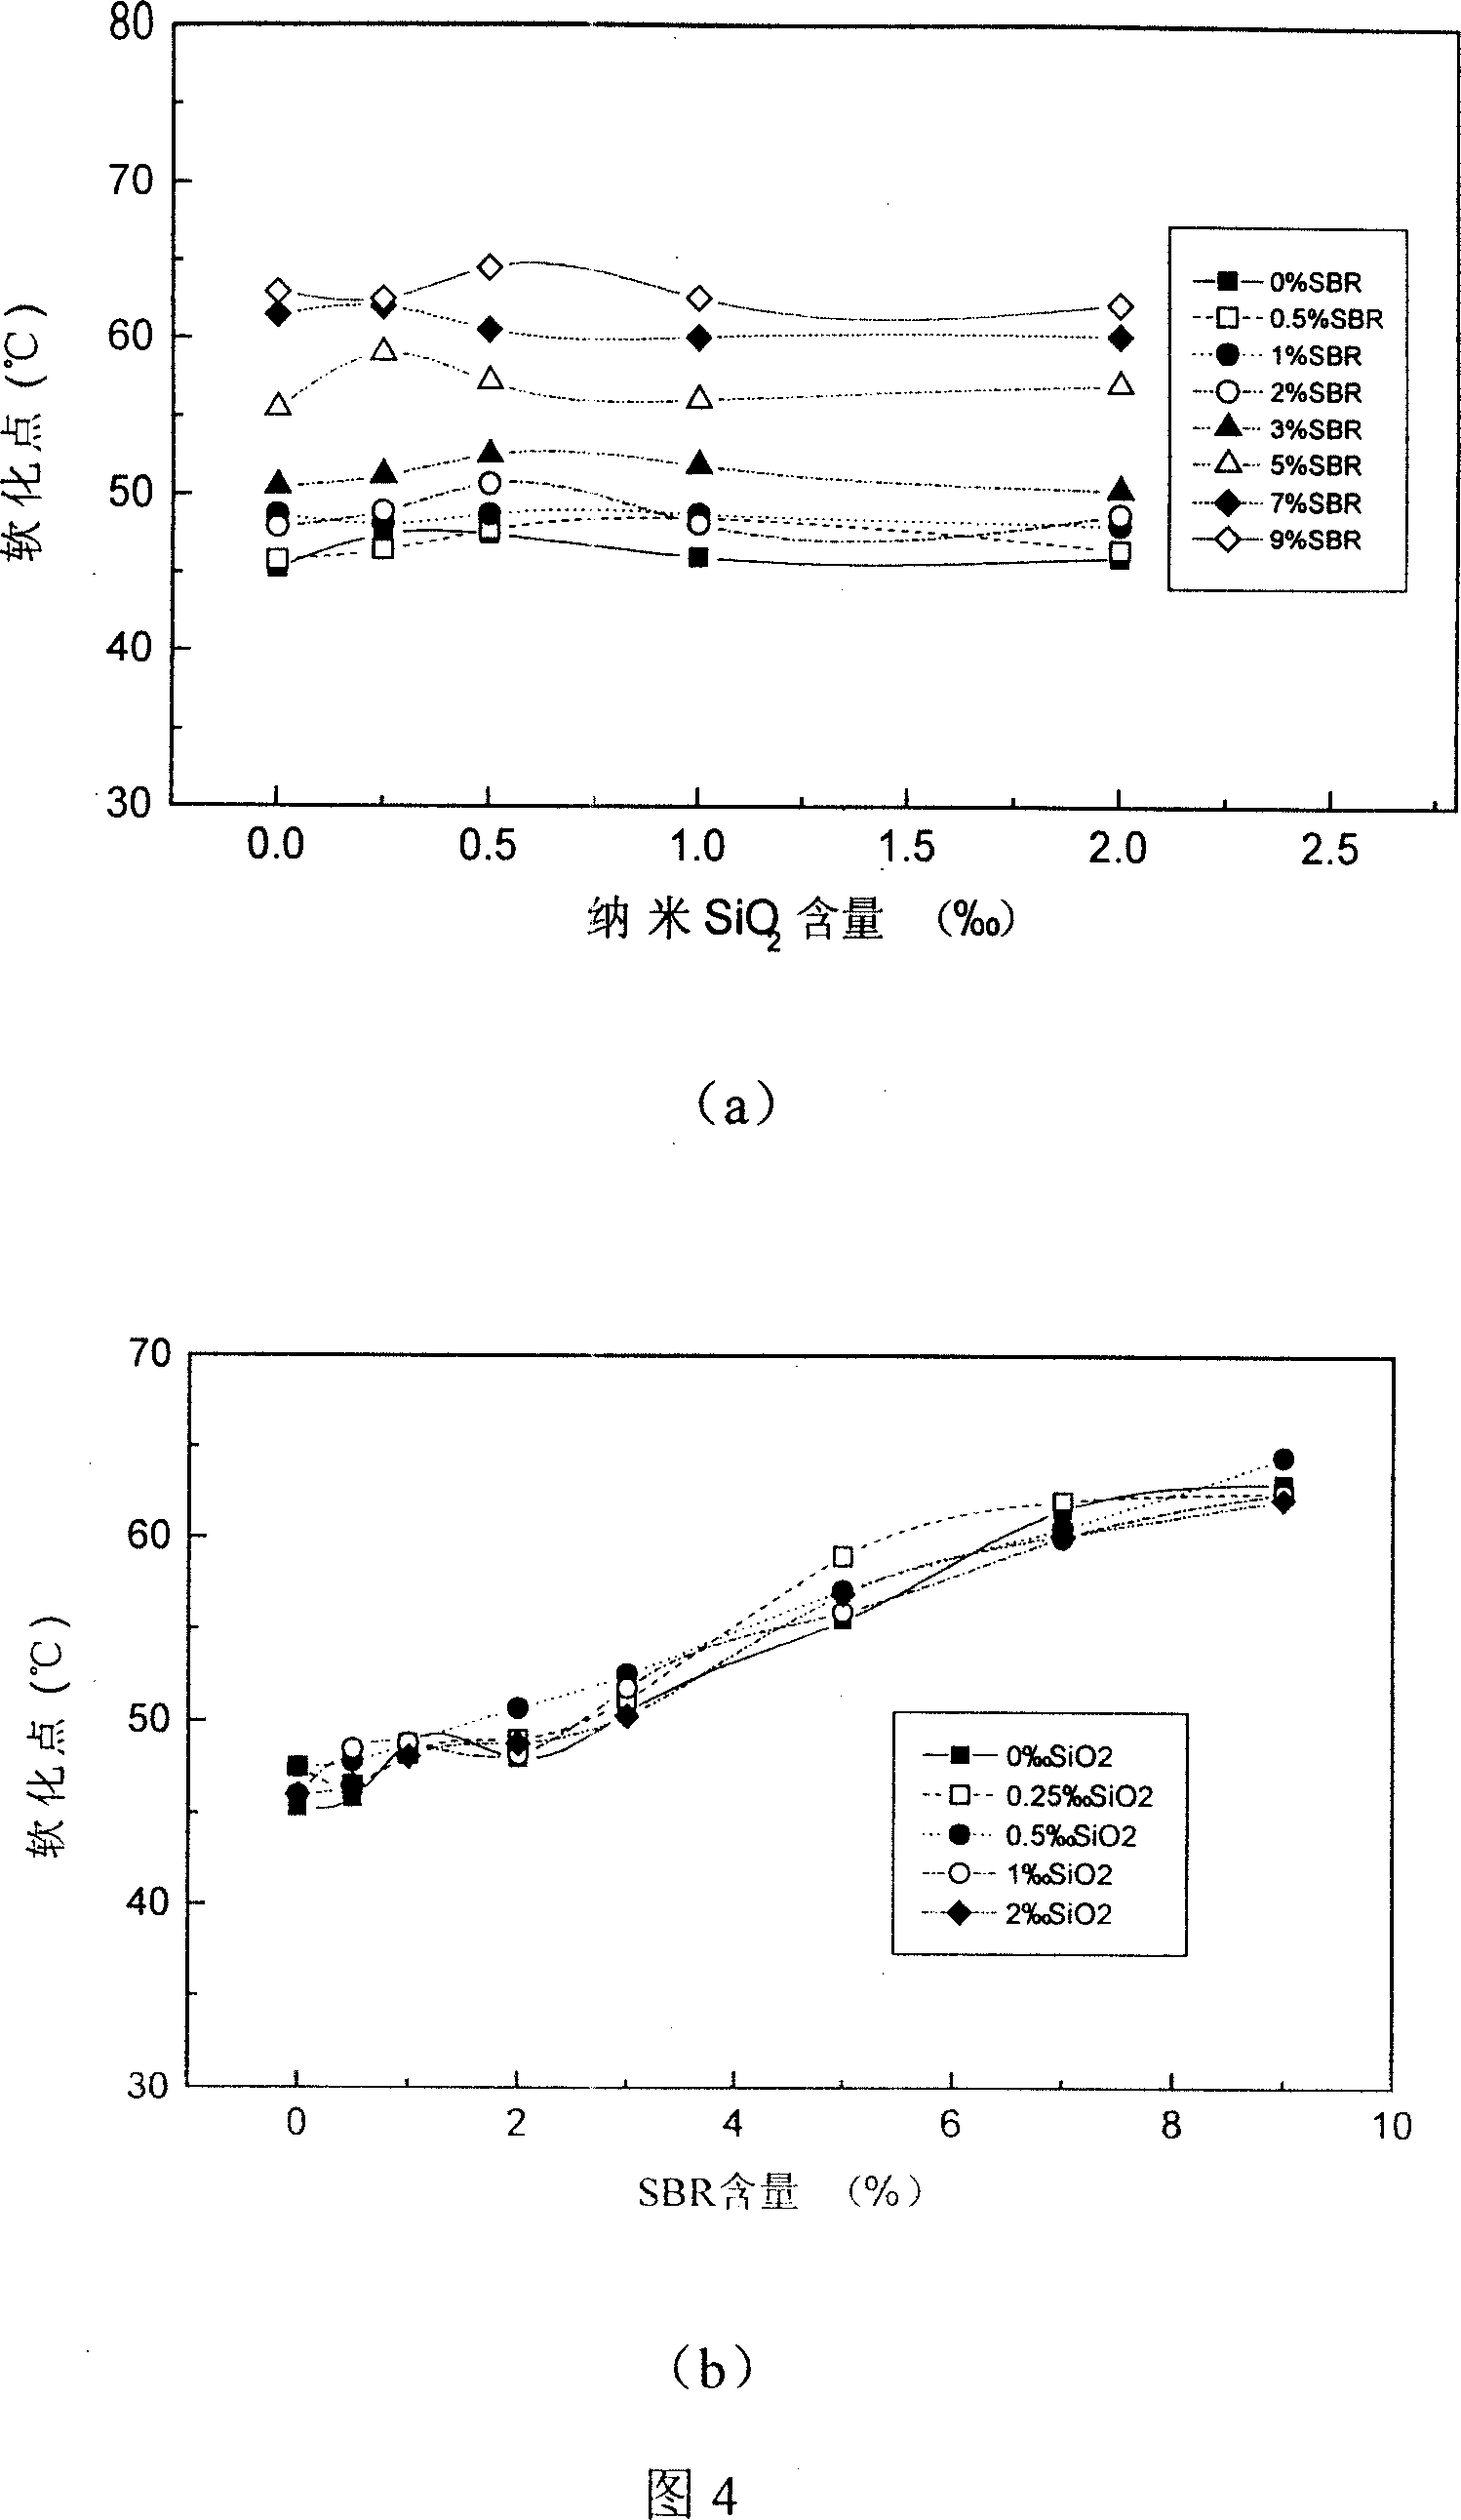 Inorganic nano particle and polymer composite modified emulsified asphalt